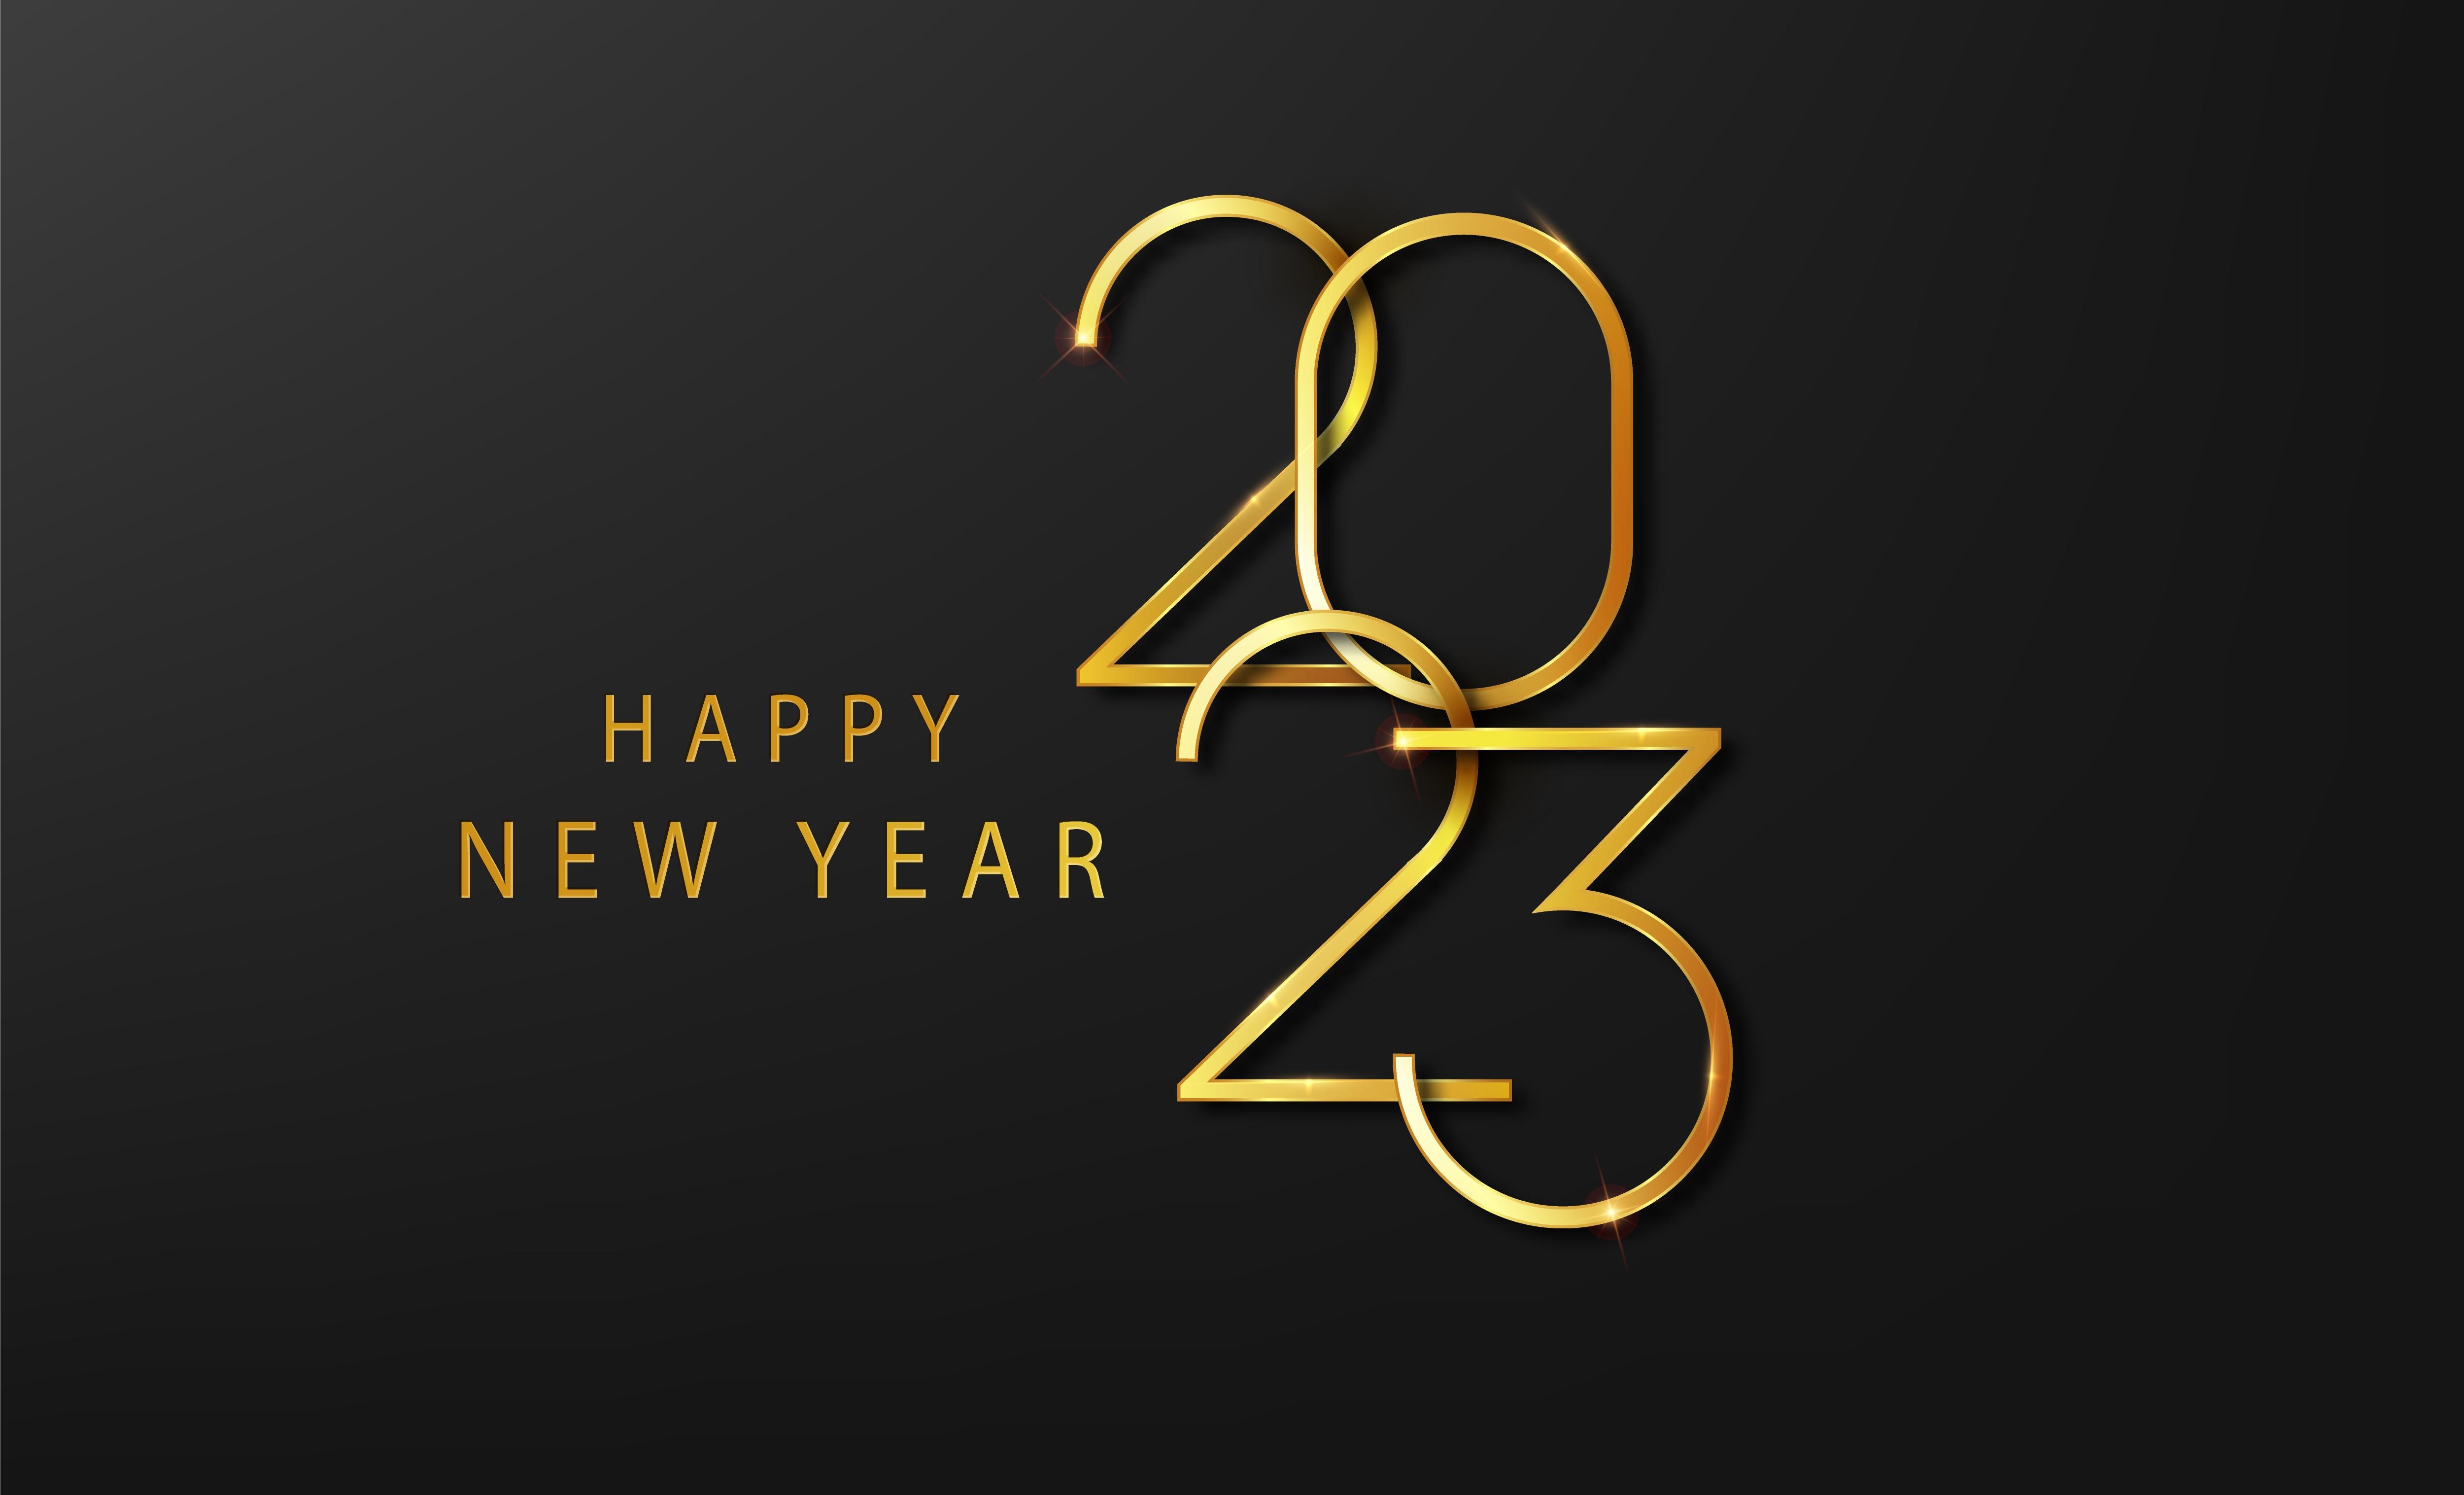 Happy New Year iPhone Wallpaper 2023 Happy New Year Wishes Free High  Resolution Images  Wallpapers Download 2023